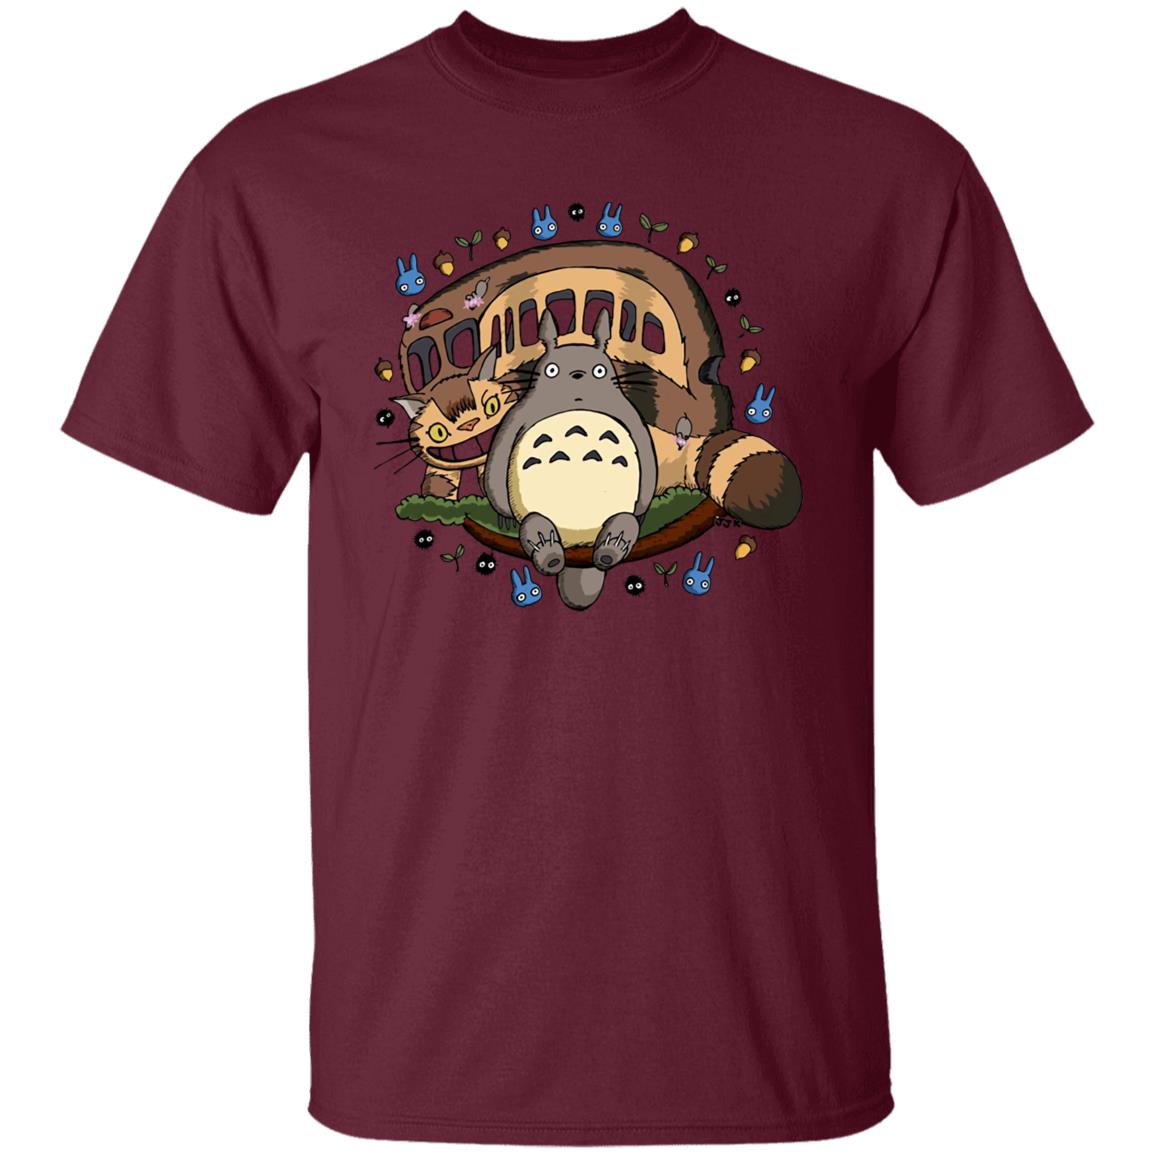 Totoro and the Catbus T Shirt